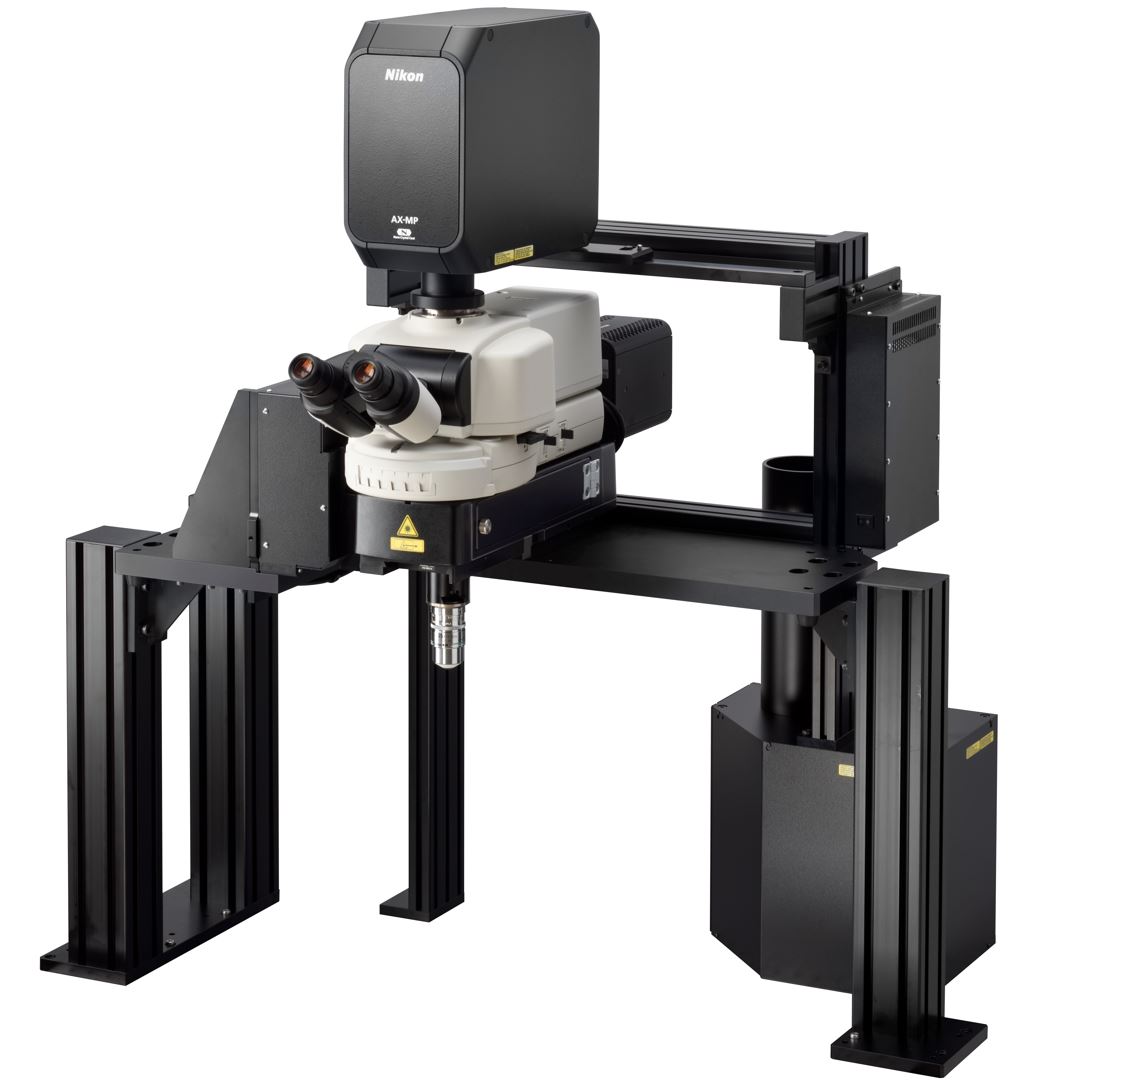 The New Nikon AX R MP multiphoton system has an optional tilting nosepiece that allows users to orientate the objective without needing to reposition the sample/animal. shorturl.at/ovHVY